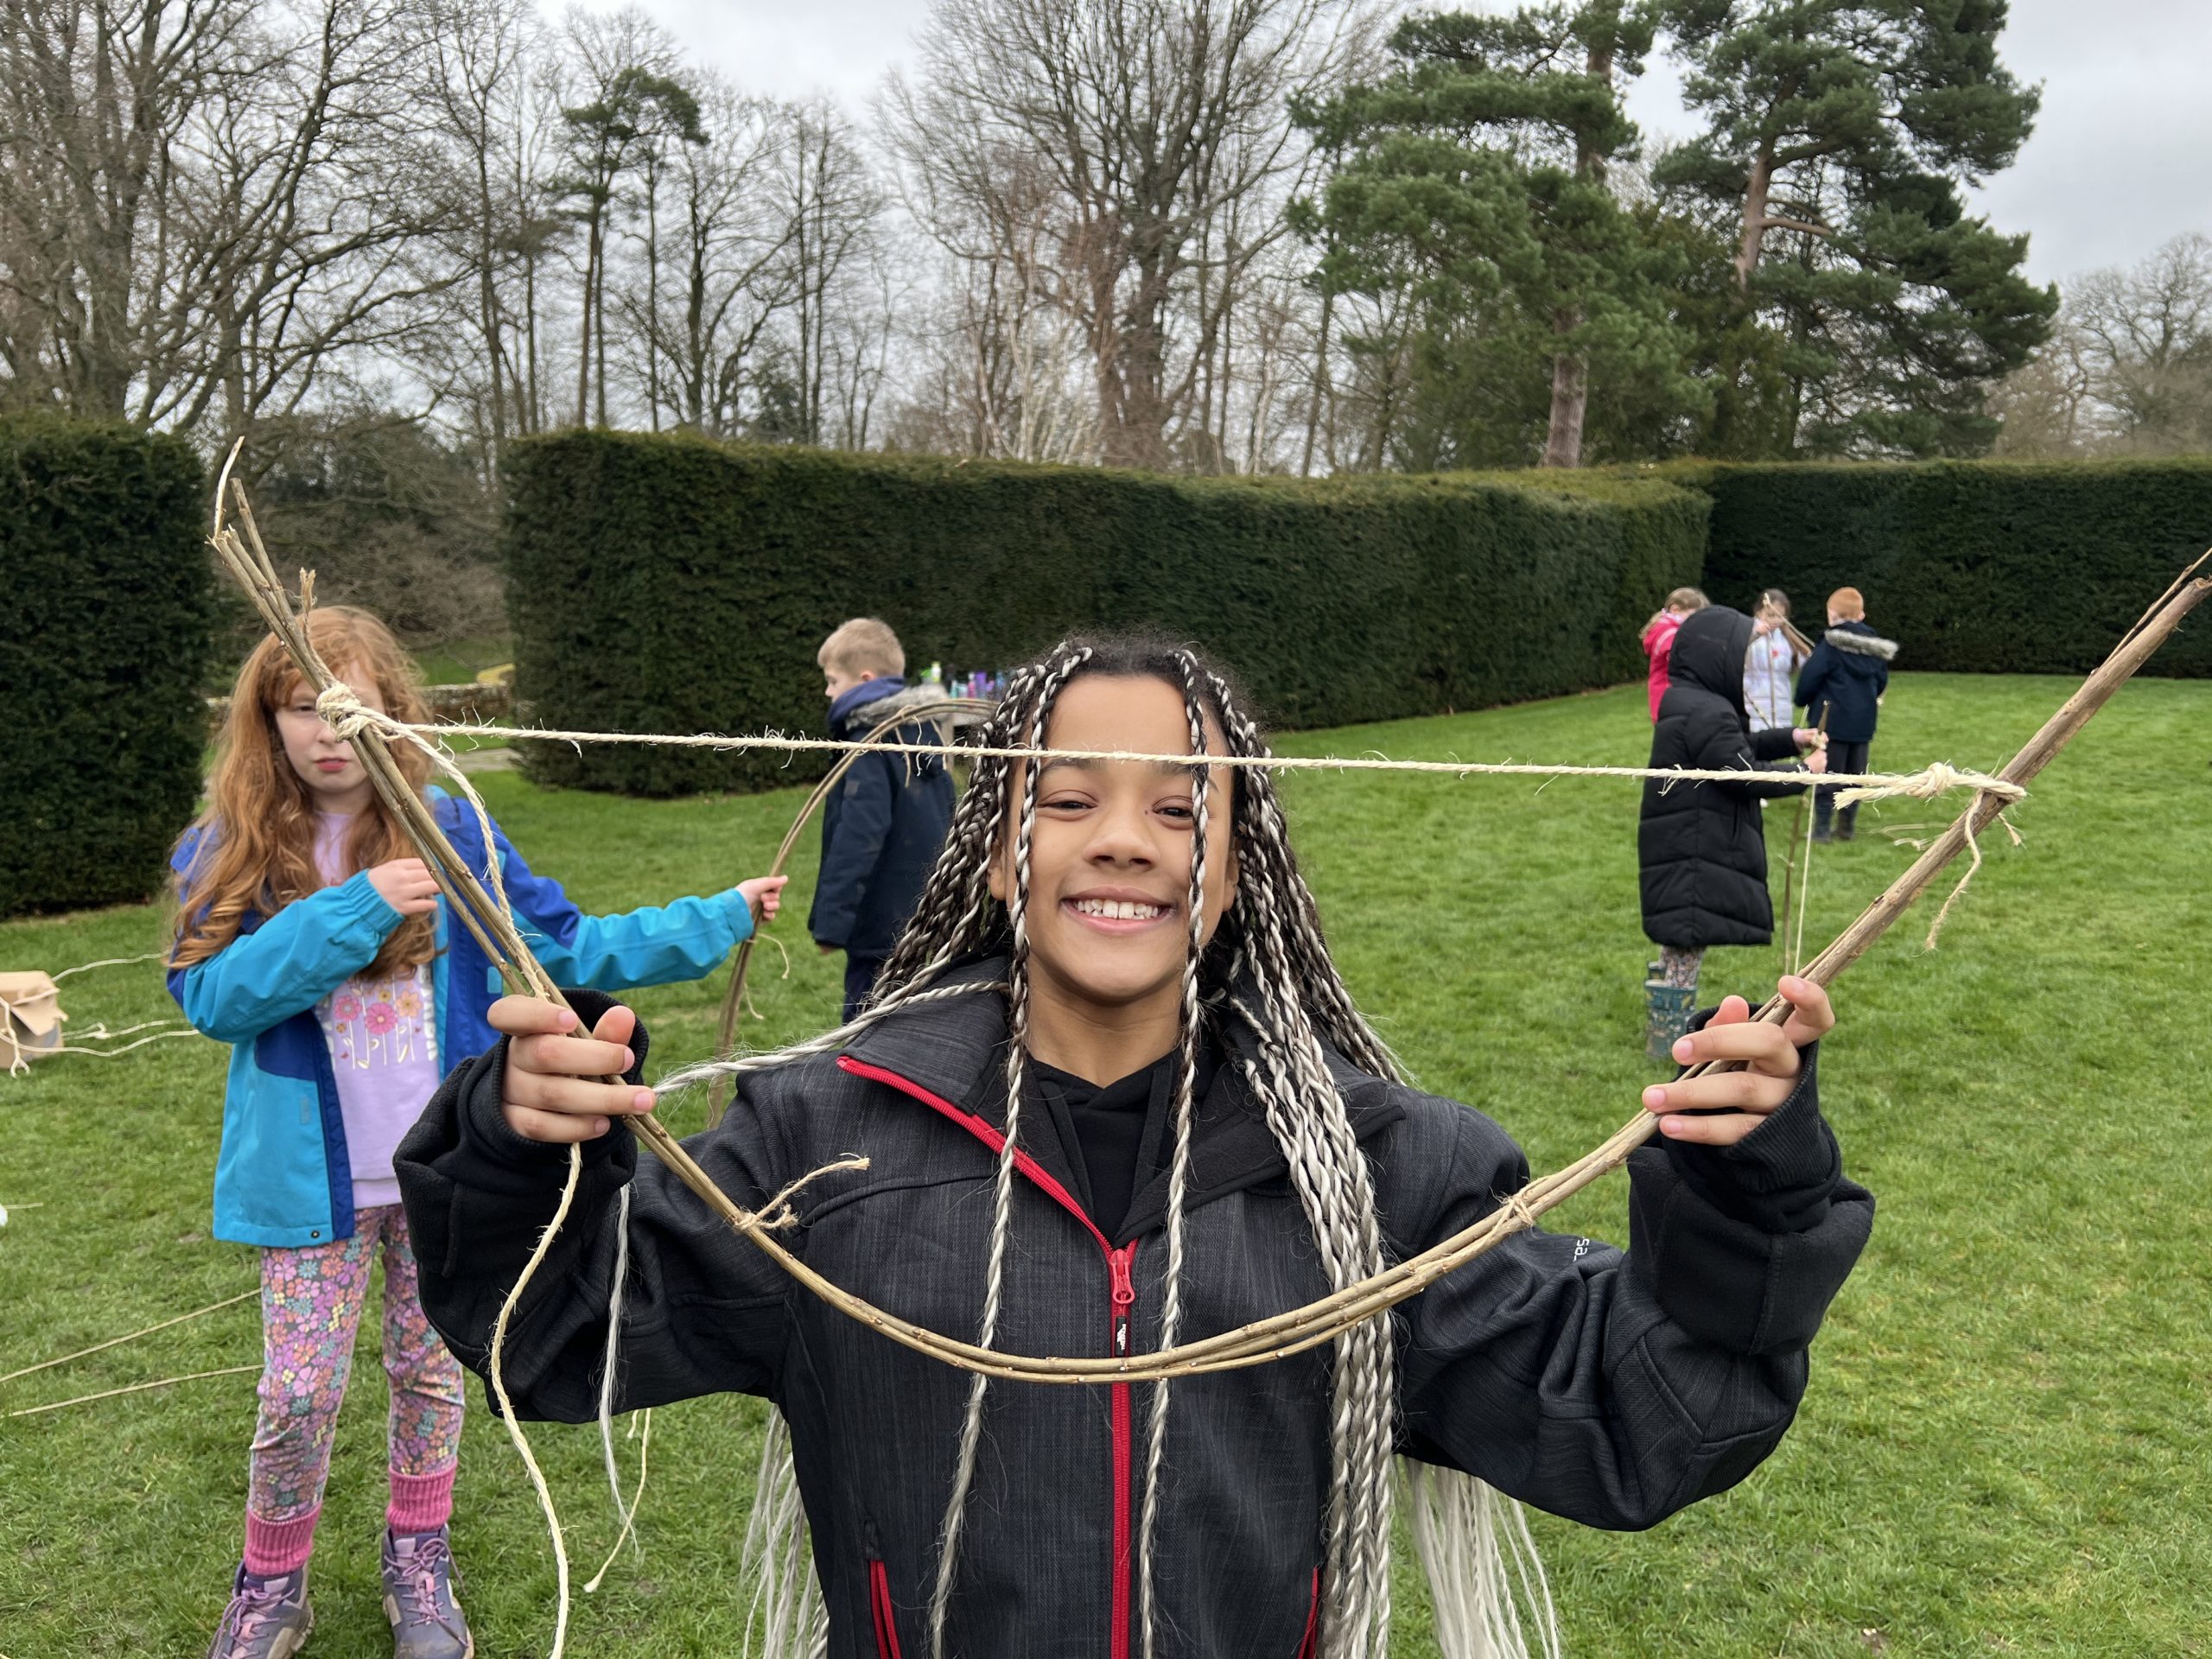 Look Mrs Boyle, my bow is as big as my smile at Ufton Court!